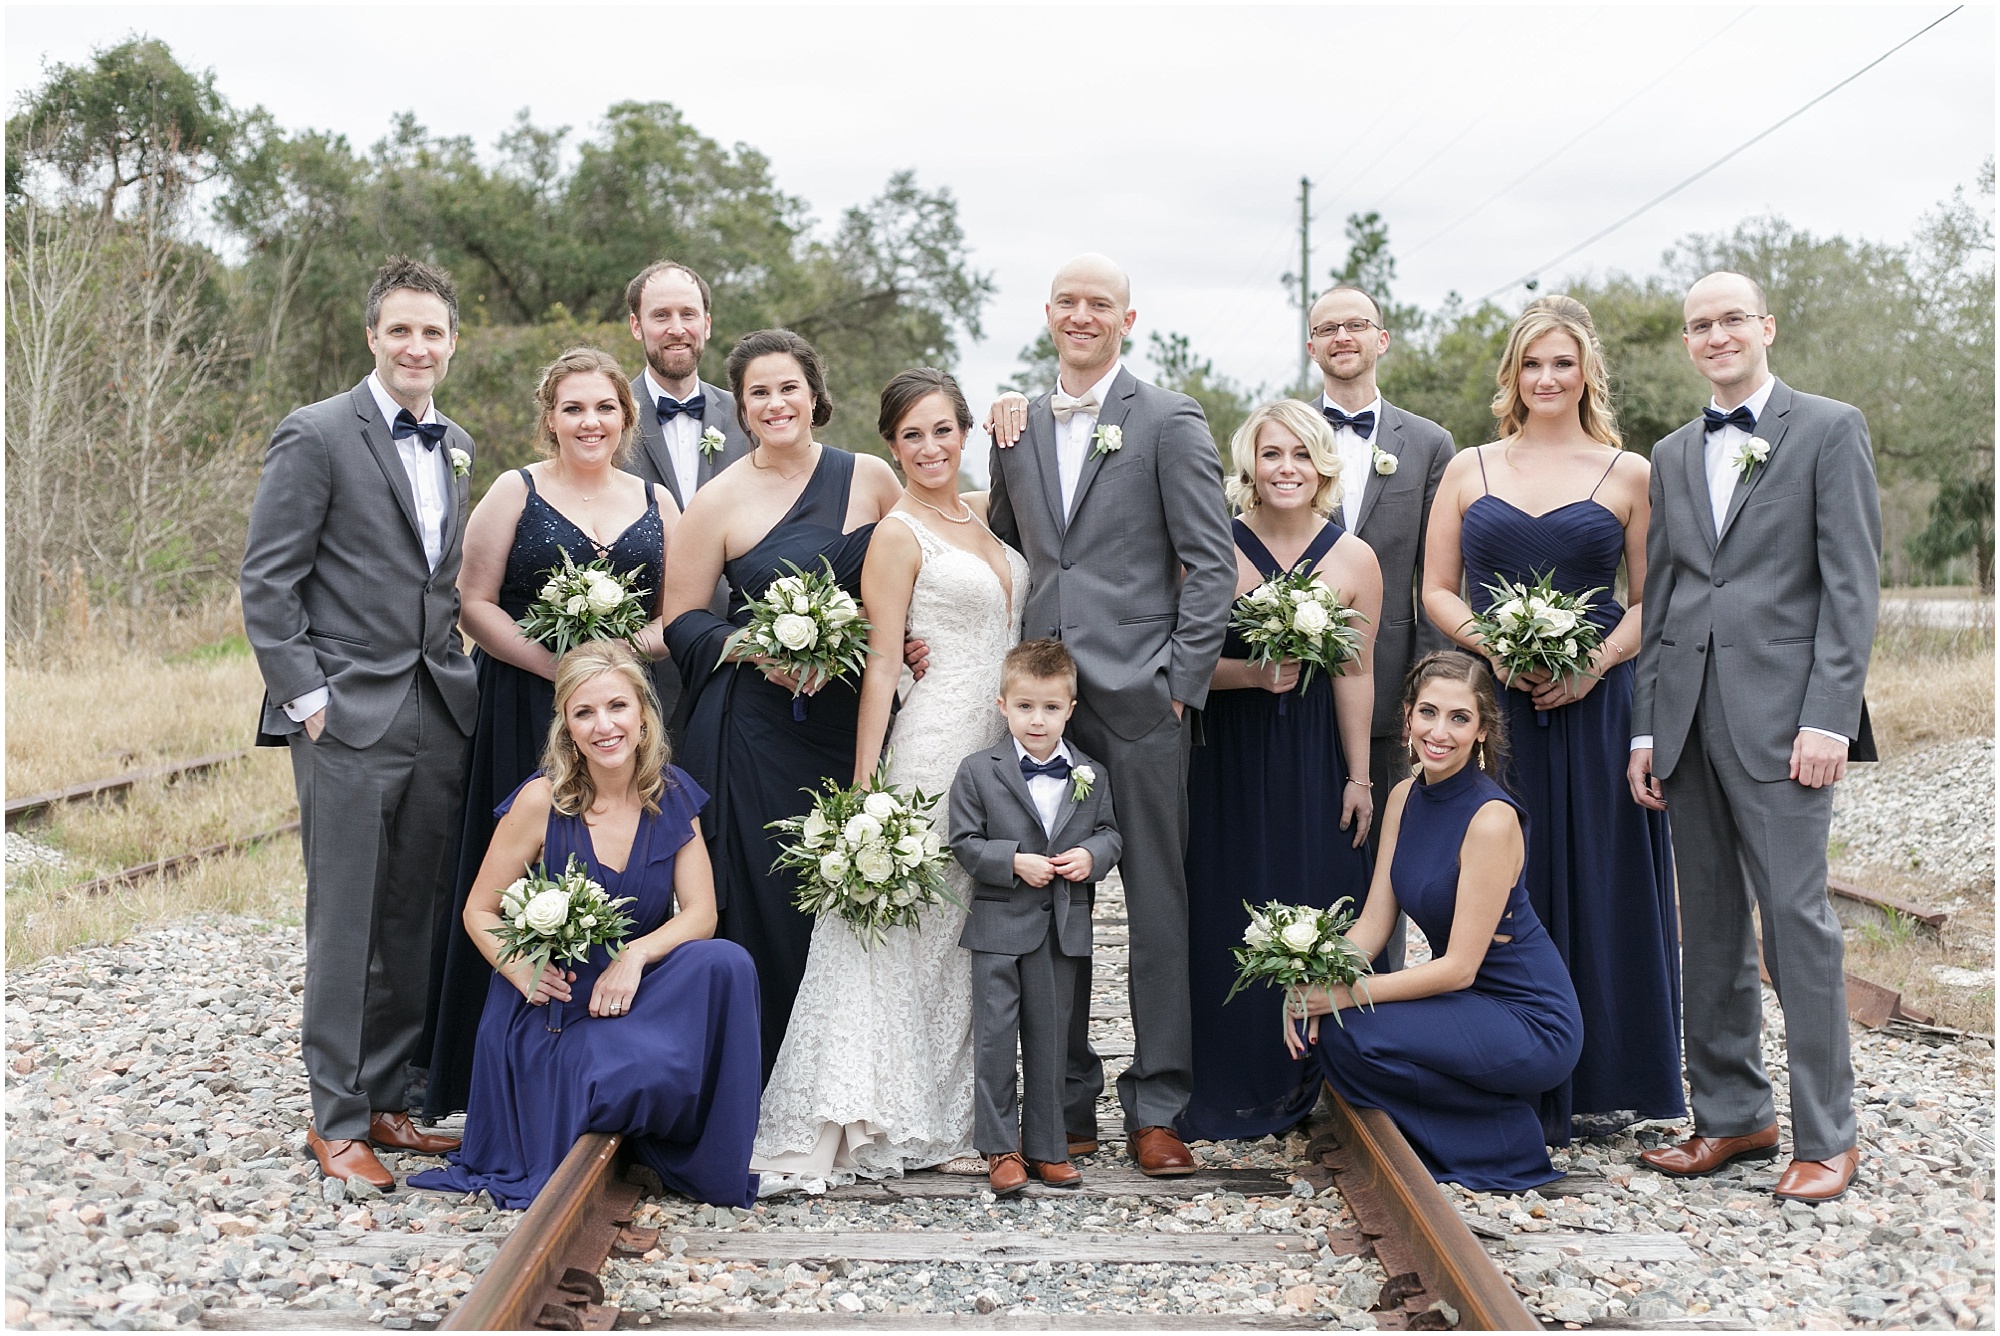 The entire wedding party posing with the bride and the groom on abandoned railroad tracks.